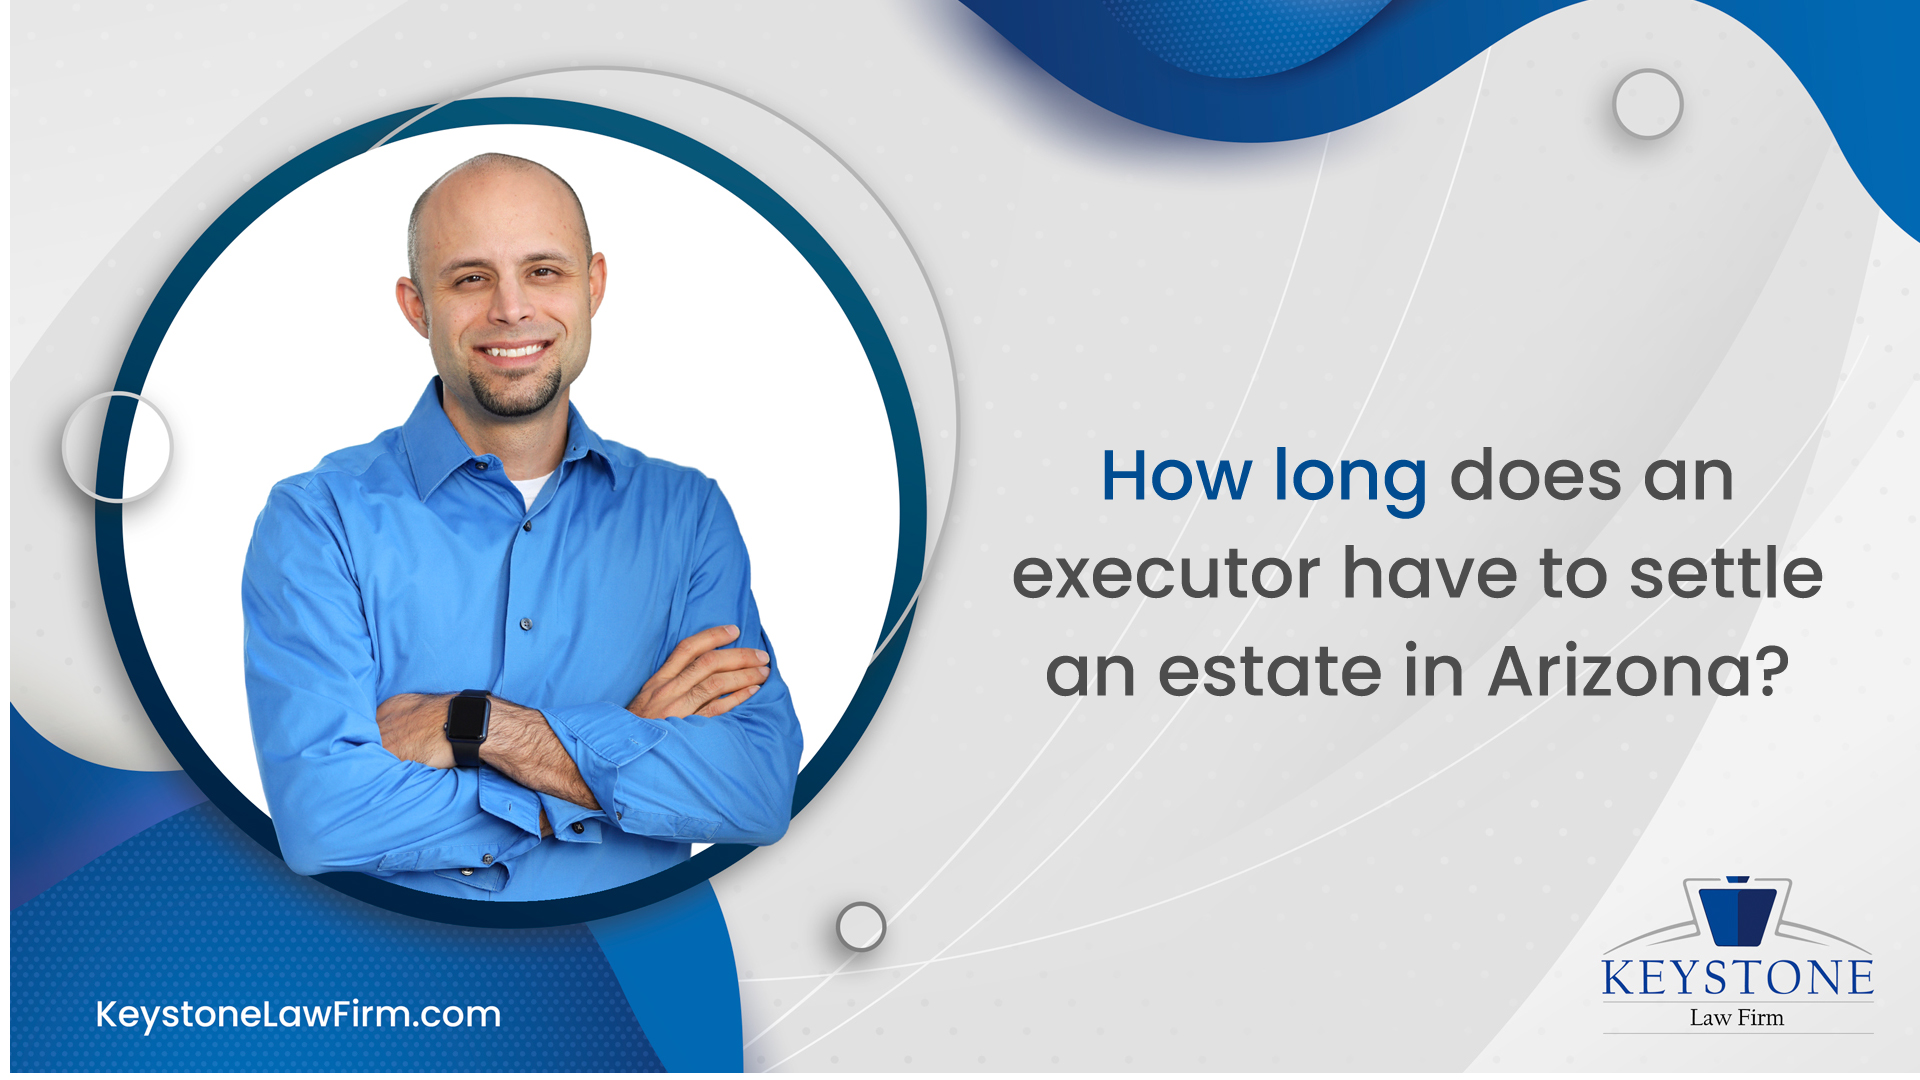 How Long Does An Executor Have To Settle An Estate In Arizona